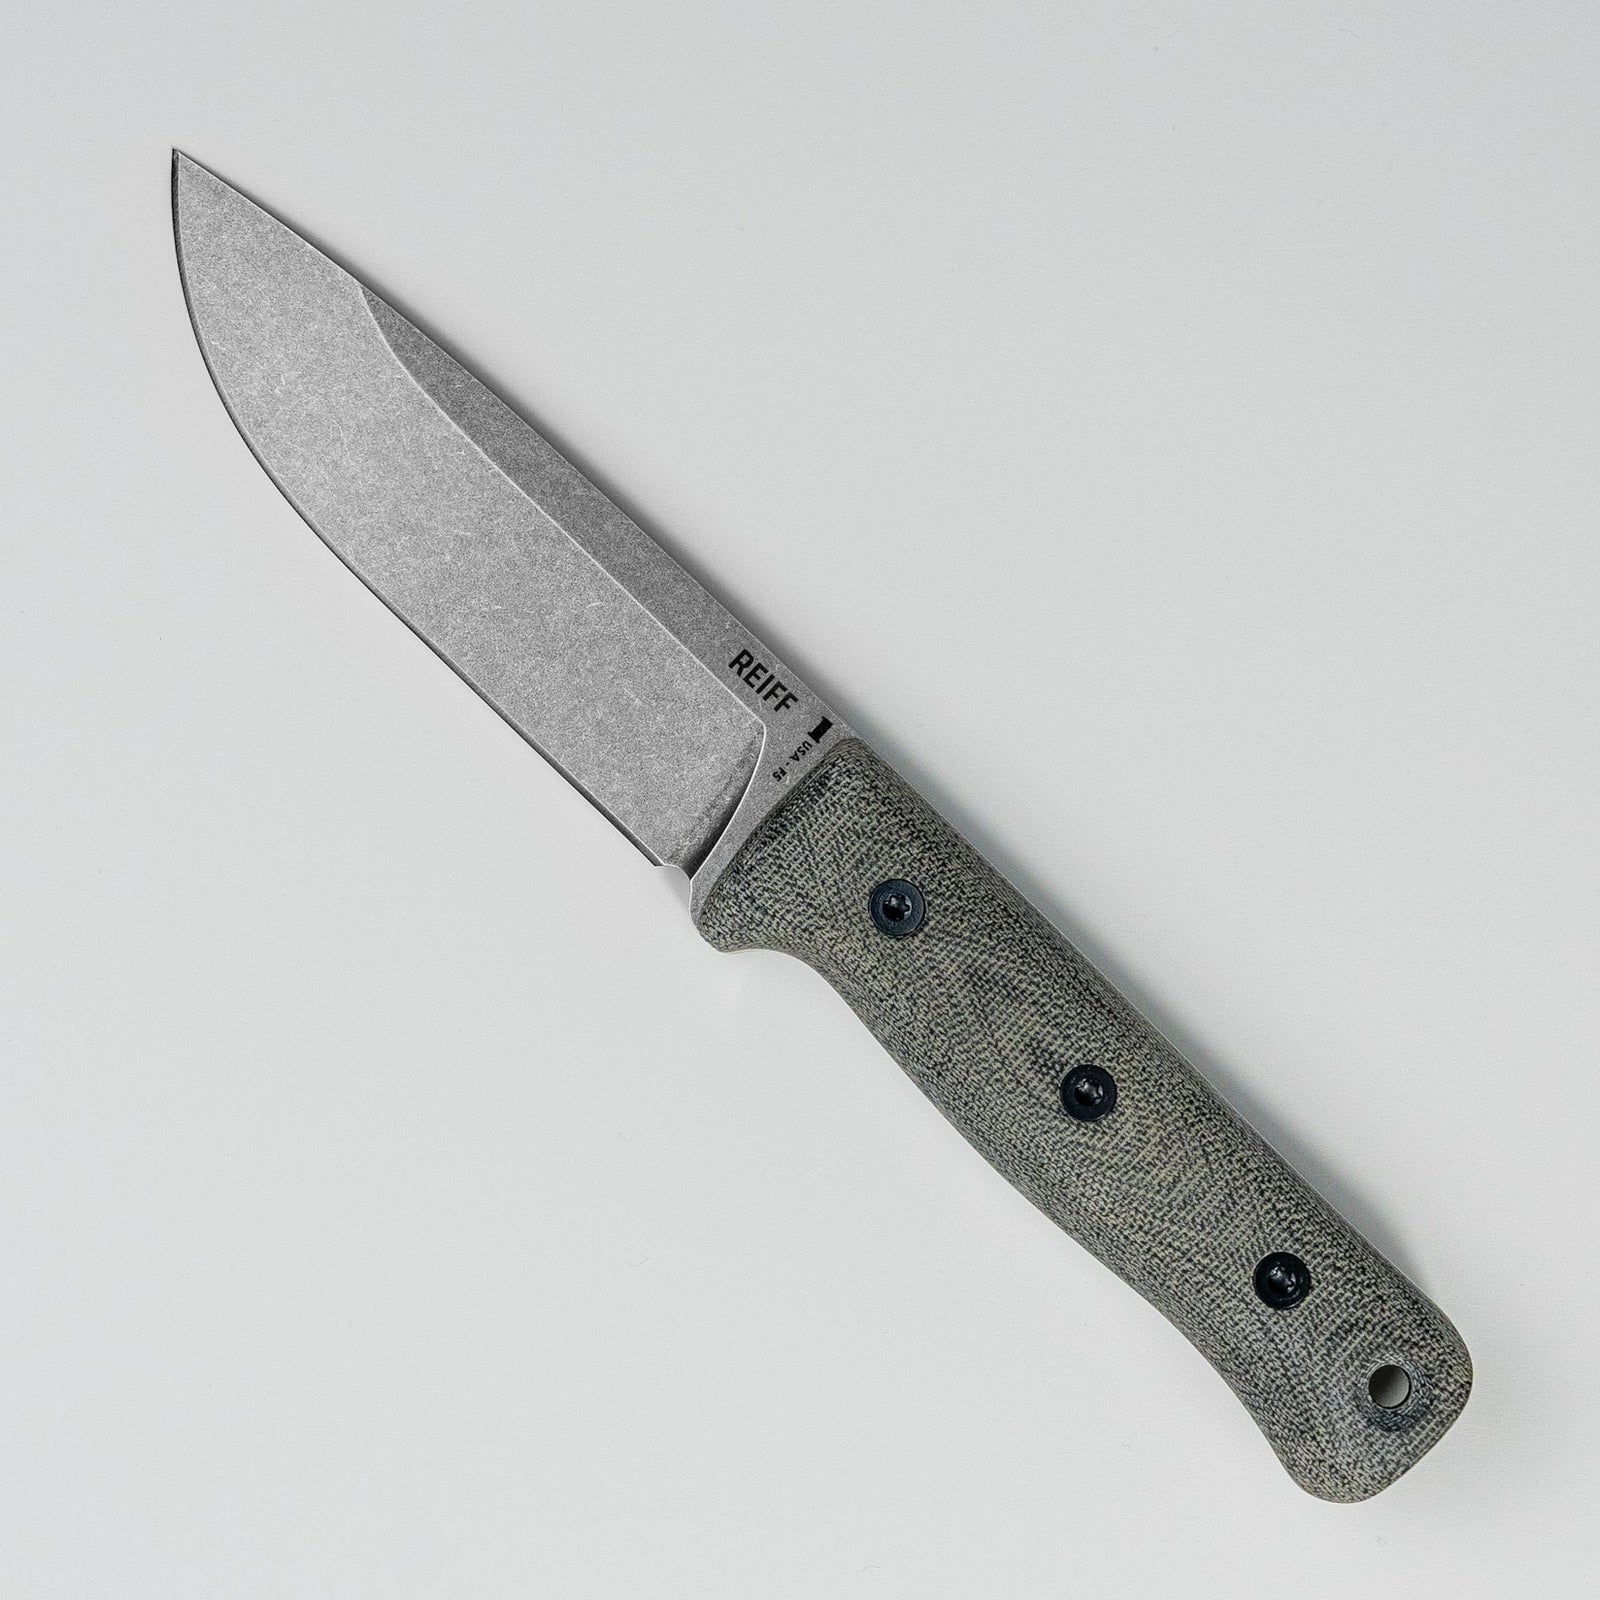 Your reliable online Fixed blade knives shop with large stock and